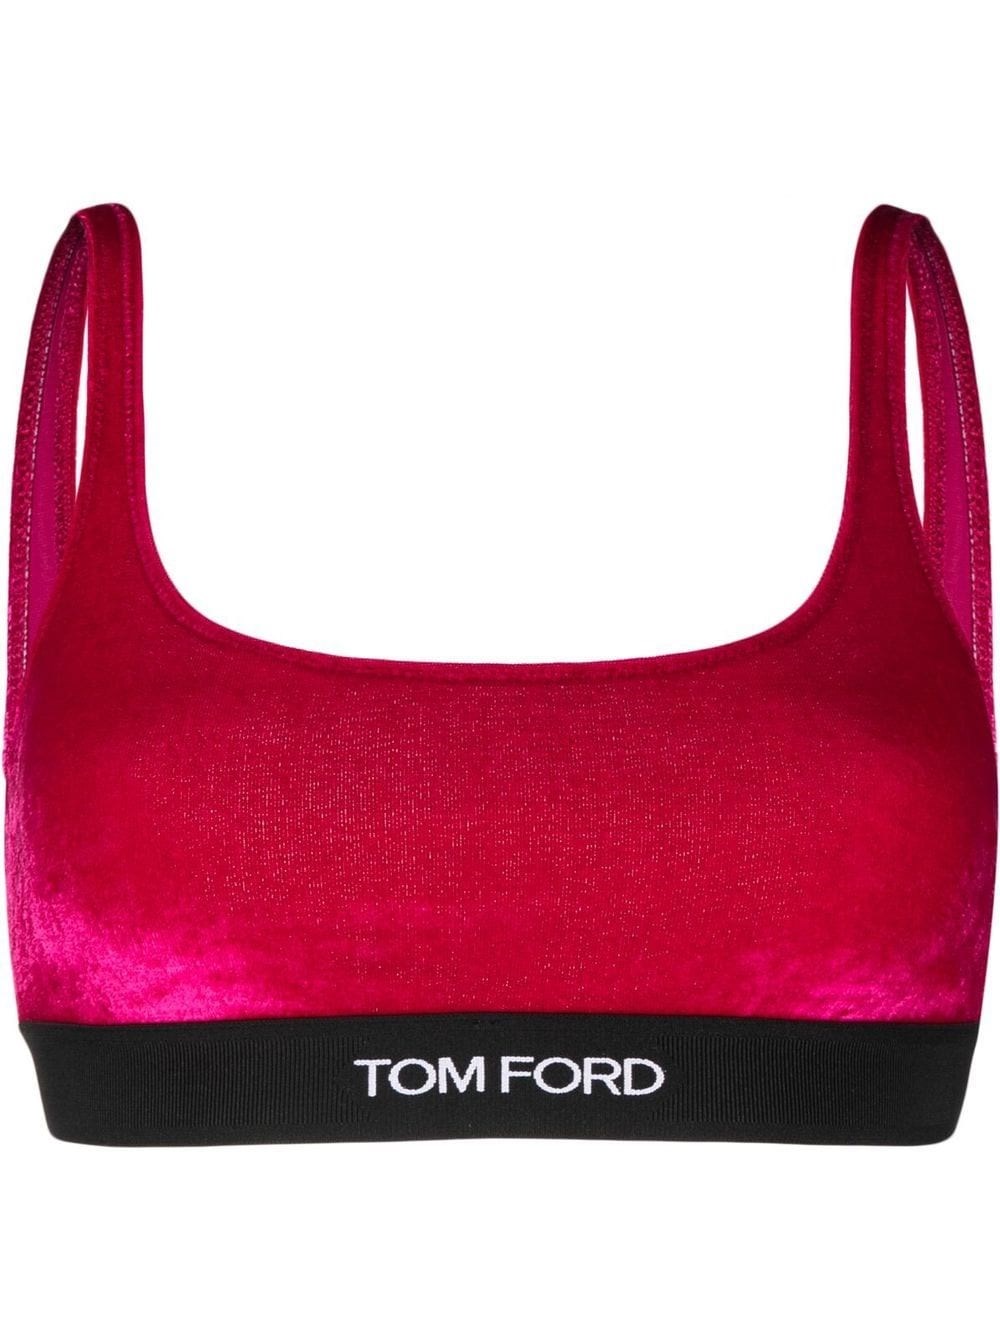 TOM FORD BRA WITH LOGO BAND